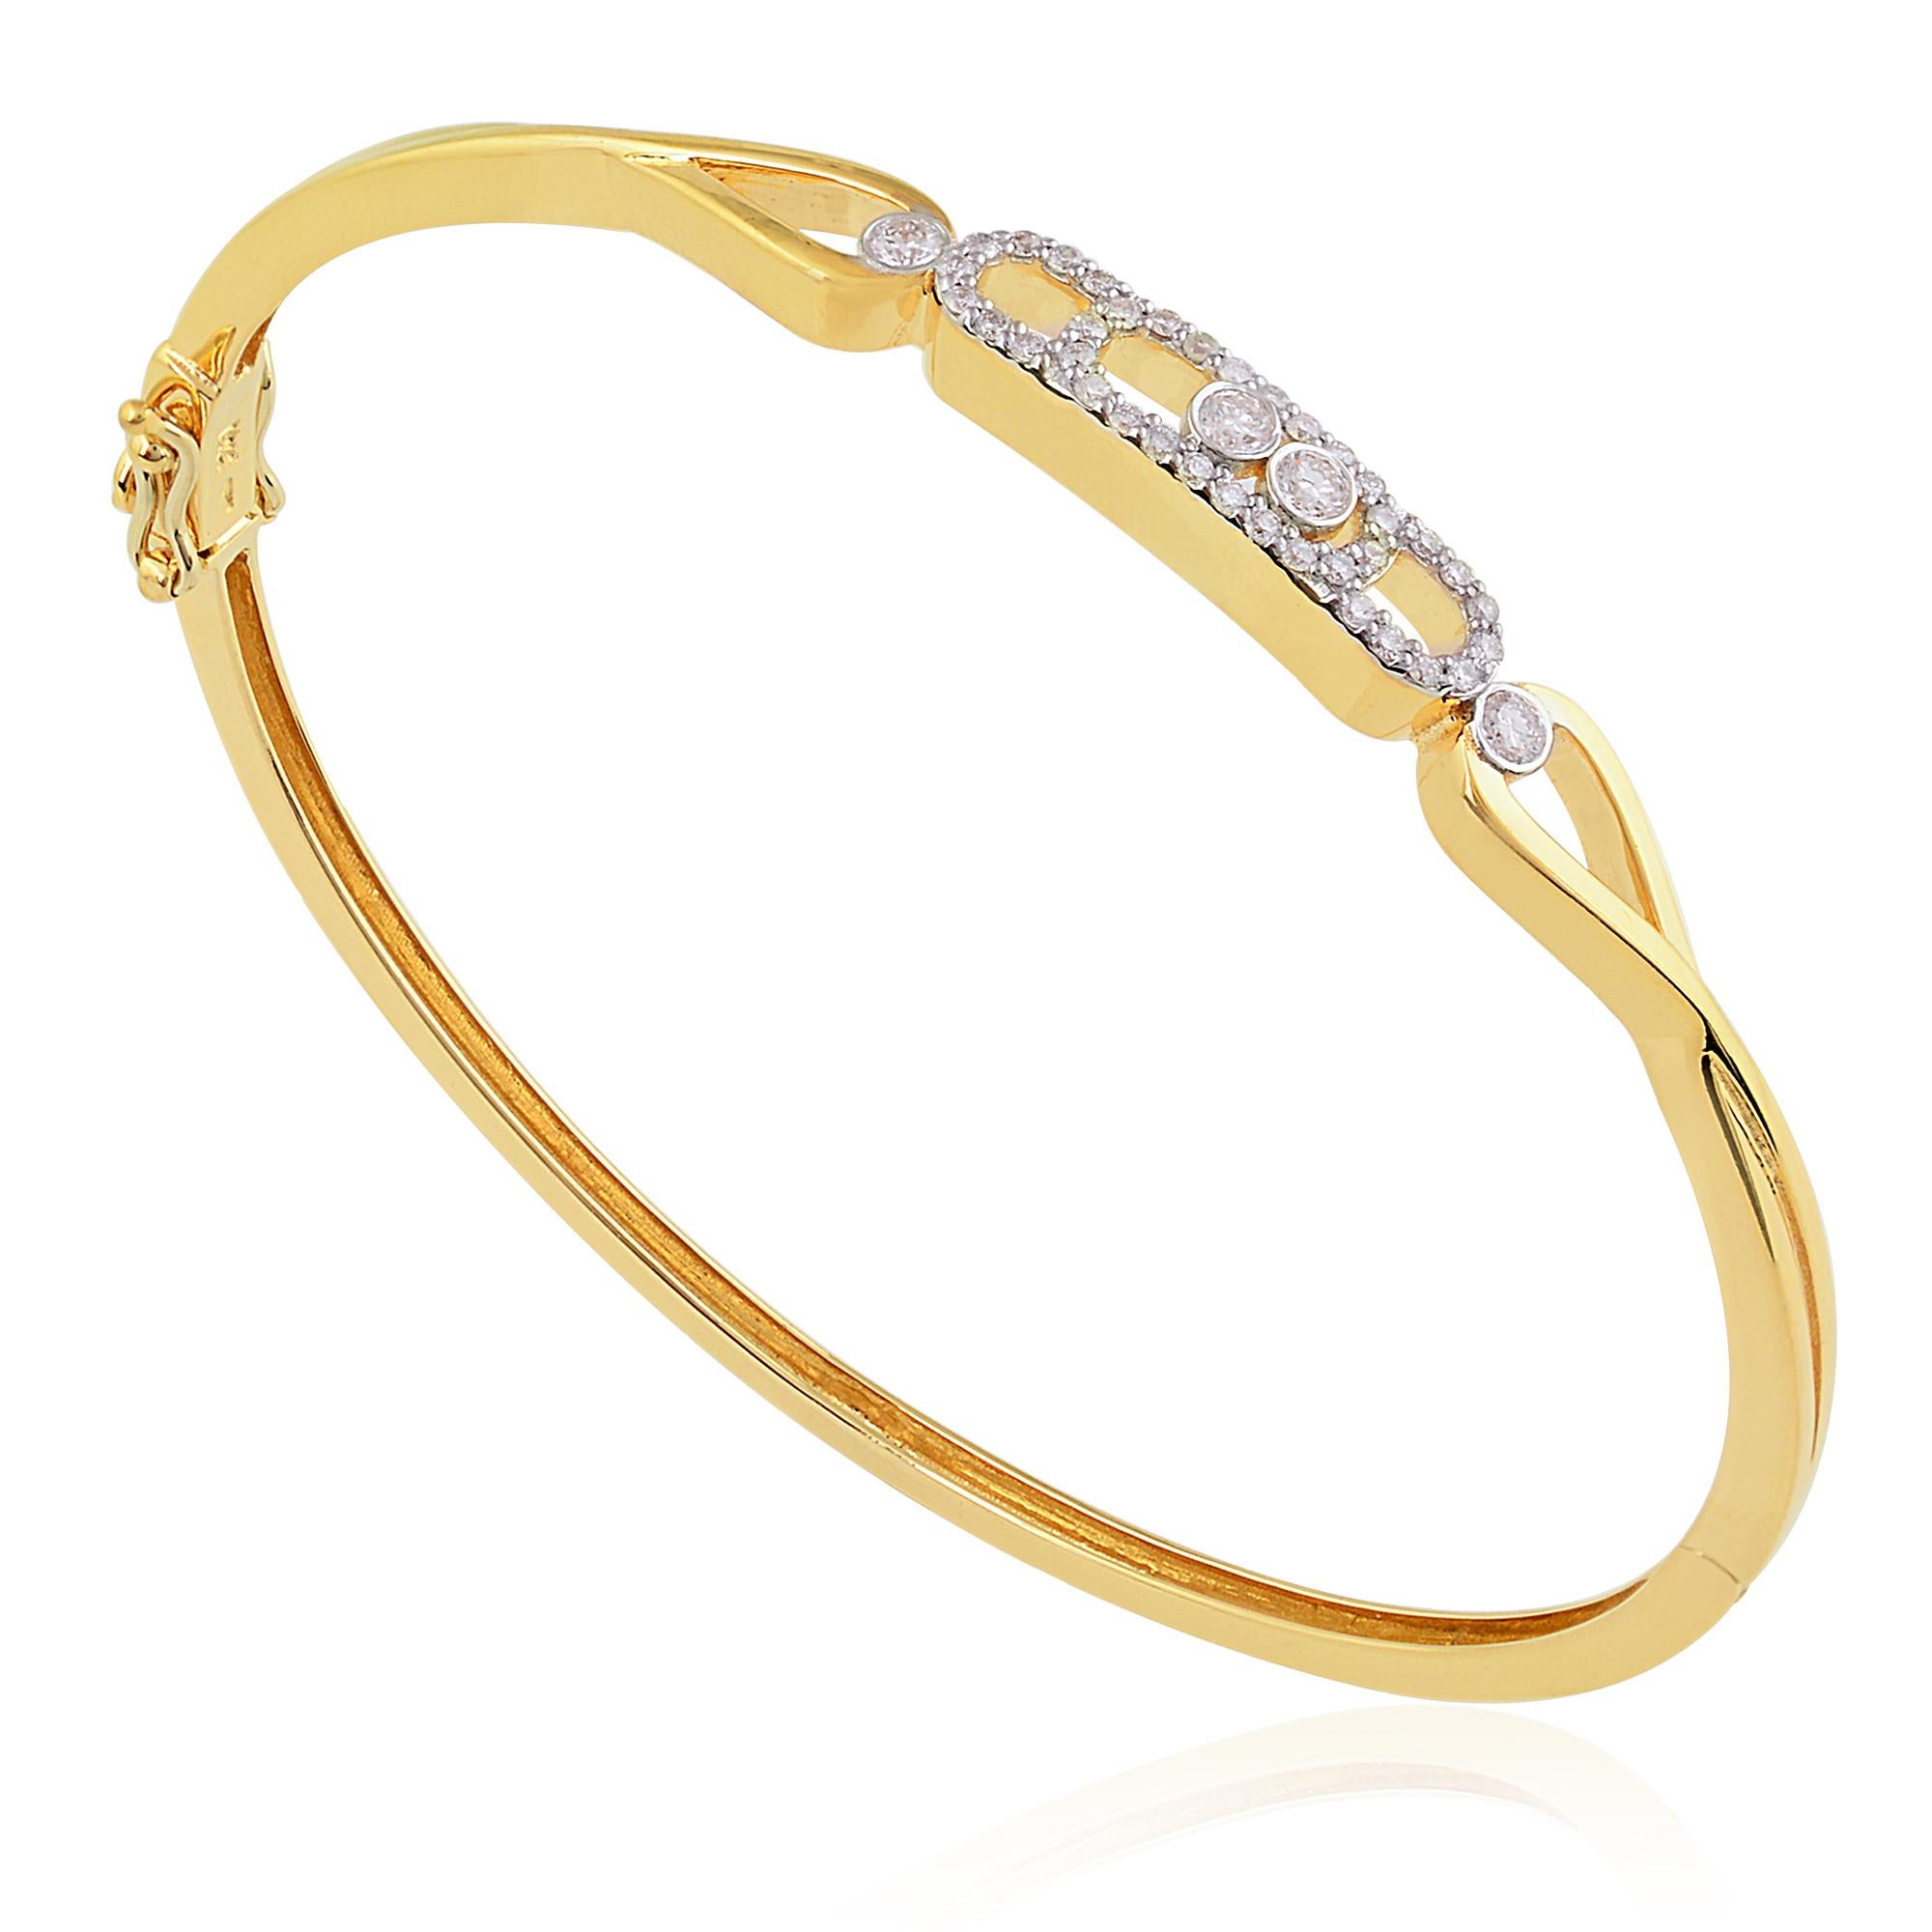 Embrace sophistication with this exquisite Natural 0.34 Carat SI/H Diamond Pave Bangle Bracelet, meticulously crafted in radiant 18 Karat Yellow Gold. This stunning bracelet is a celebration of refined luxury and timeless elegance, designed to adorn